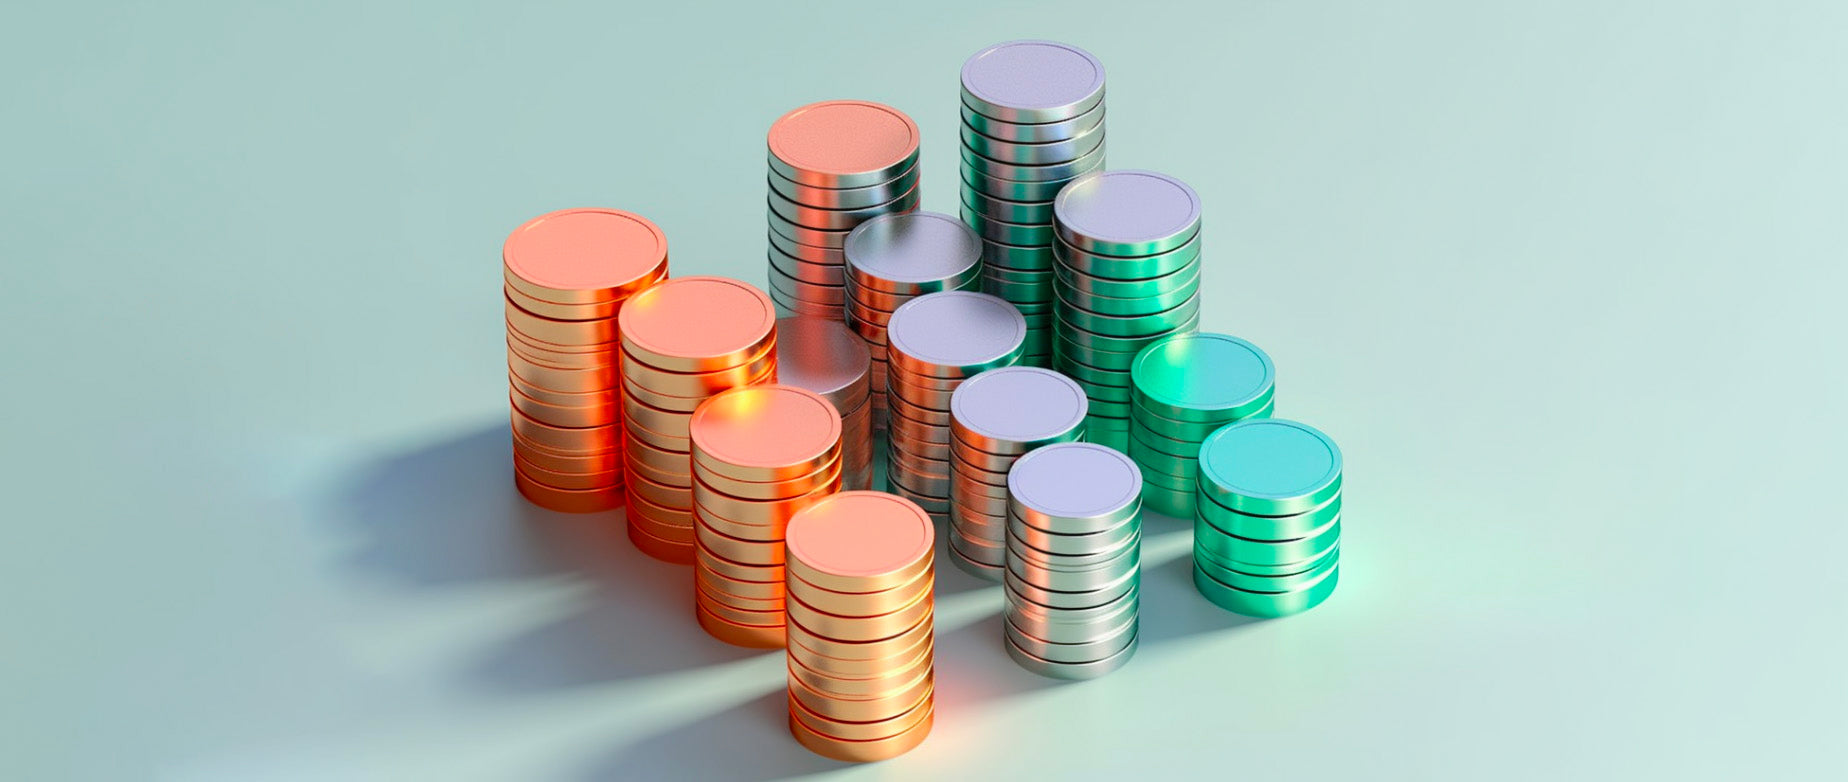 three rows with 4 stacks of coins: opportunity cost example